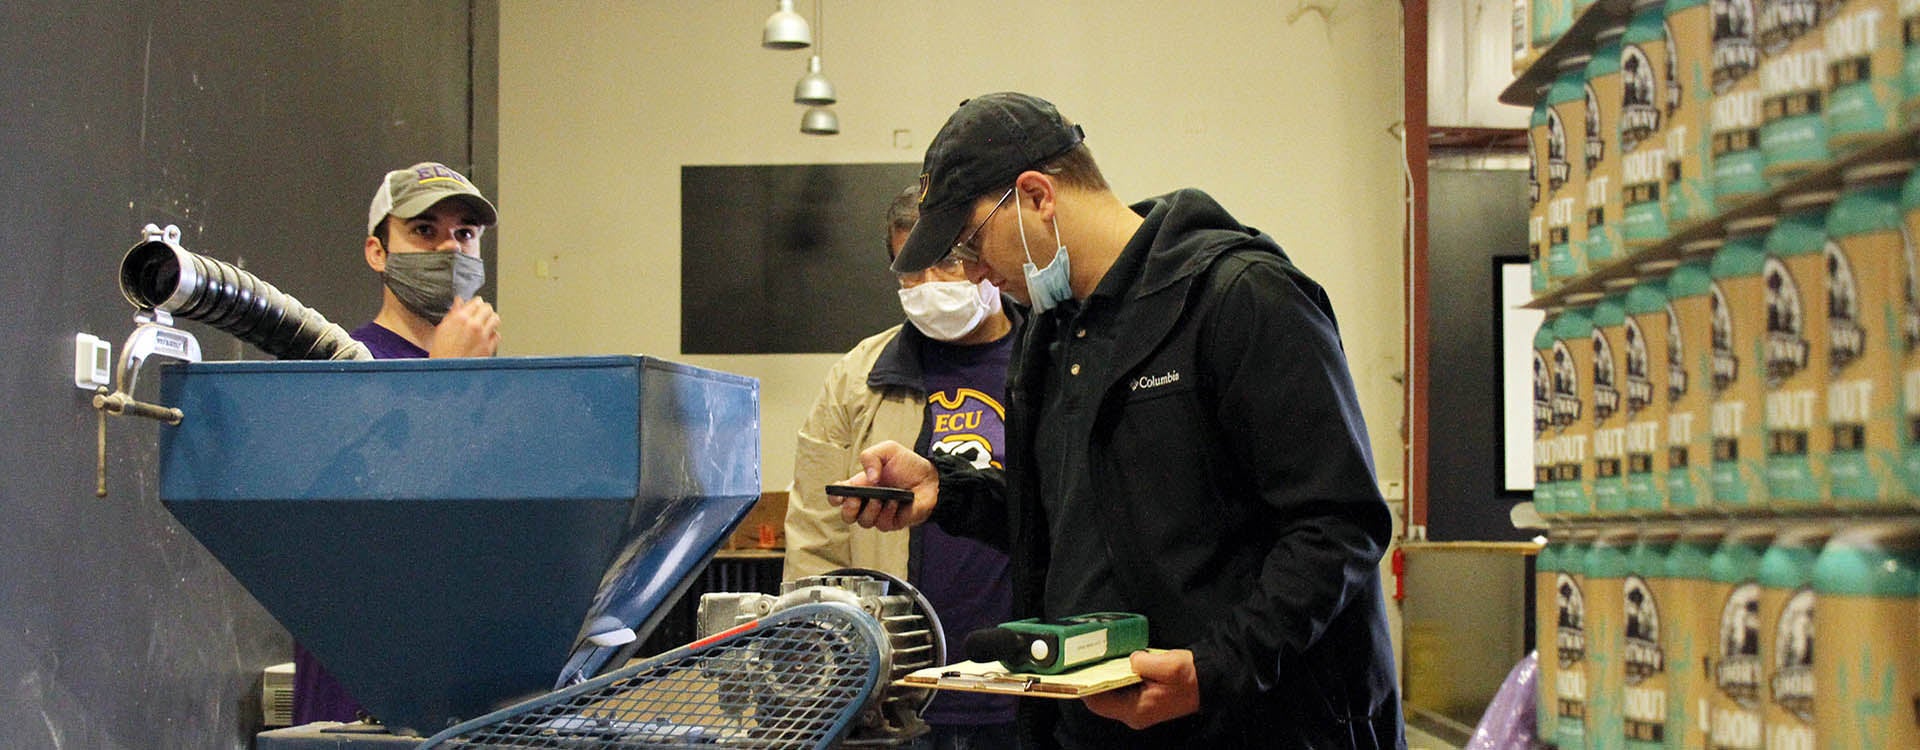 Engineering students Michael Trapani, right, and Kenneth Weddle, along with Dr. Tarek Abdel-Salam, director of the East Carolina University Center for Sustainable Energy and Environmental Engineering, examine equipment during an energy audit at Shortway Brewing. (Photos by Ken Buday)